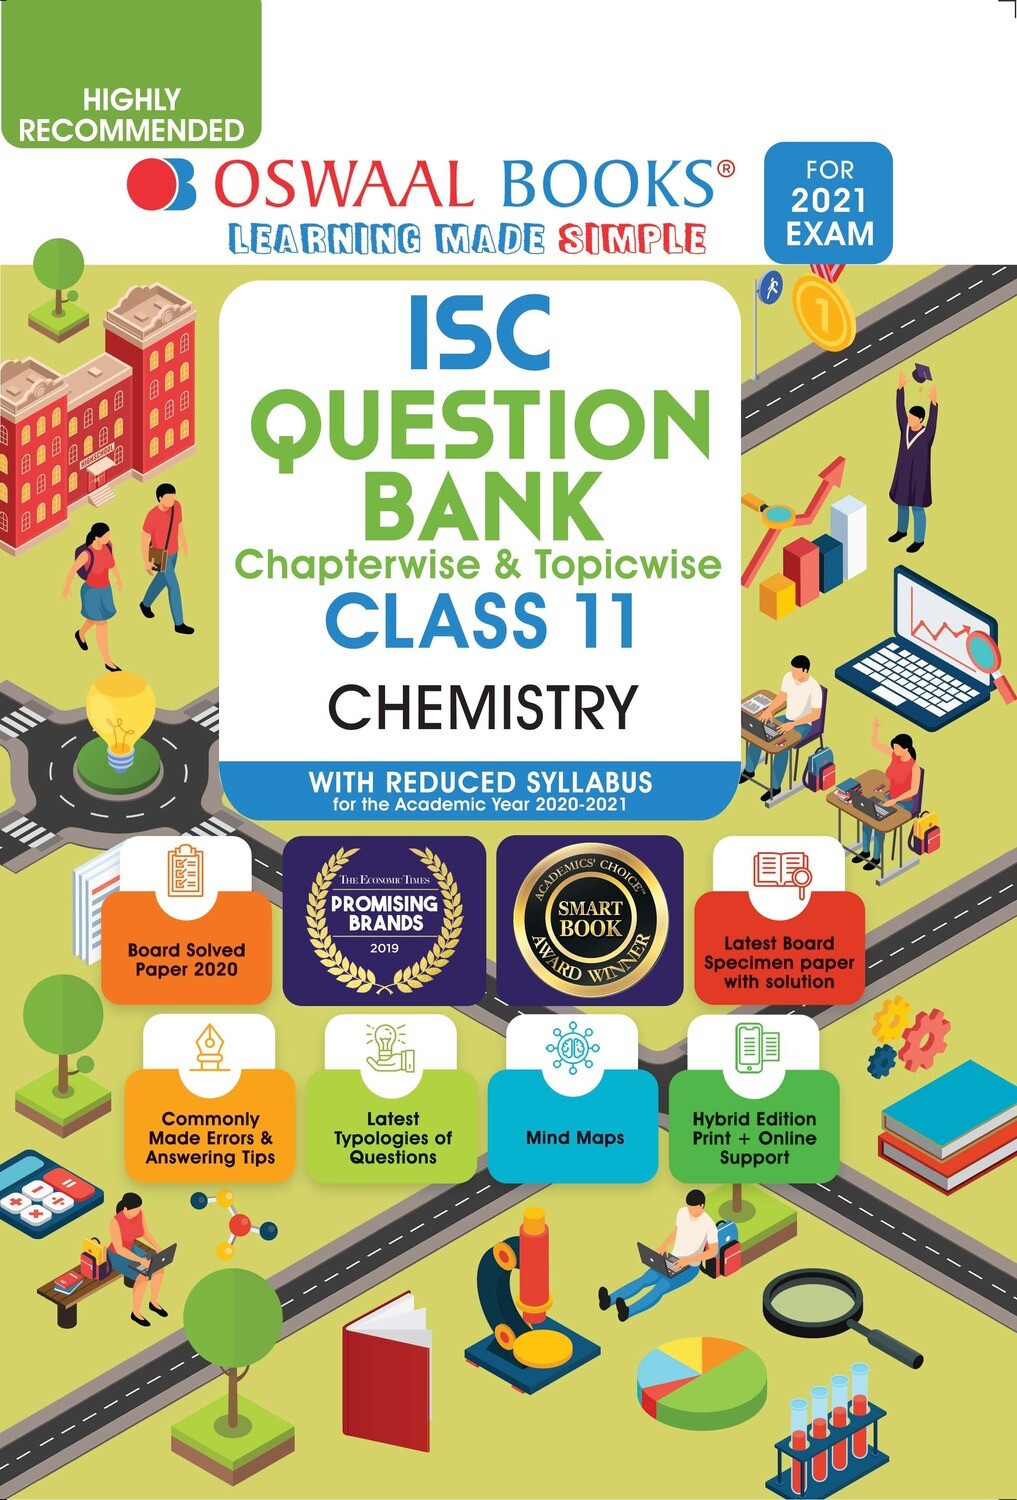 Buy e-book: Oswaal ISC Question Banks Class 11 Chemistry (Reduced Syllabus) (For 2021 Exam)